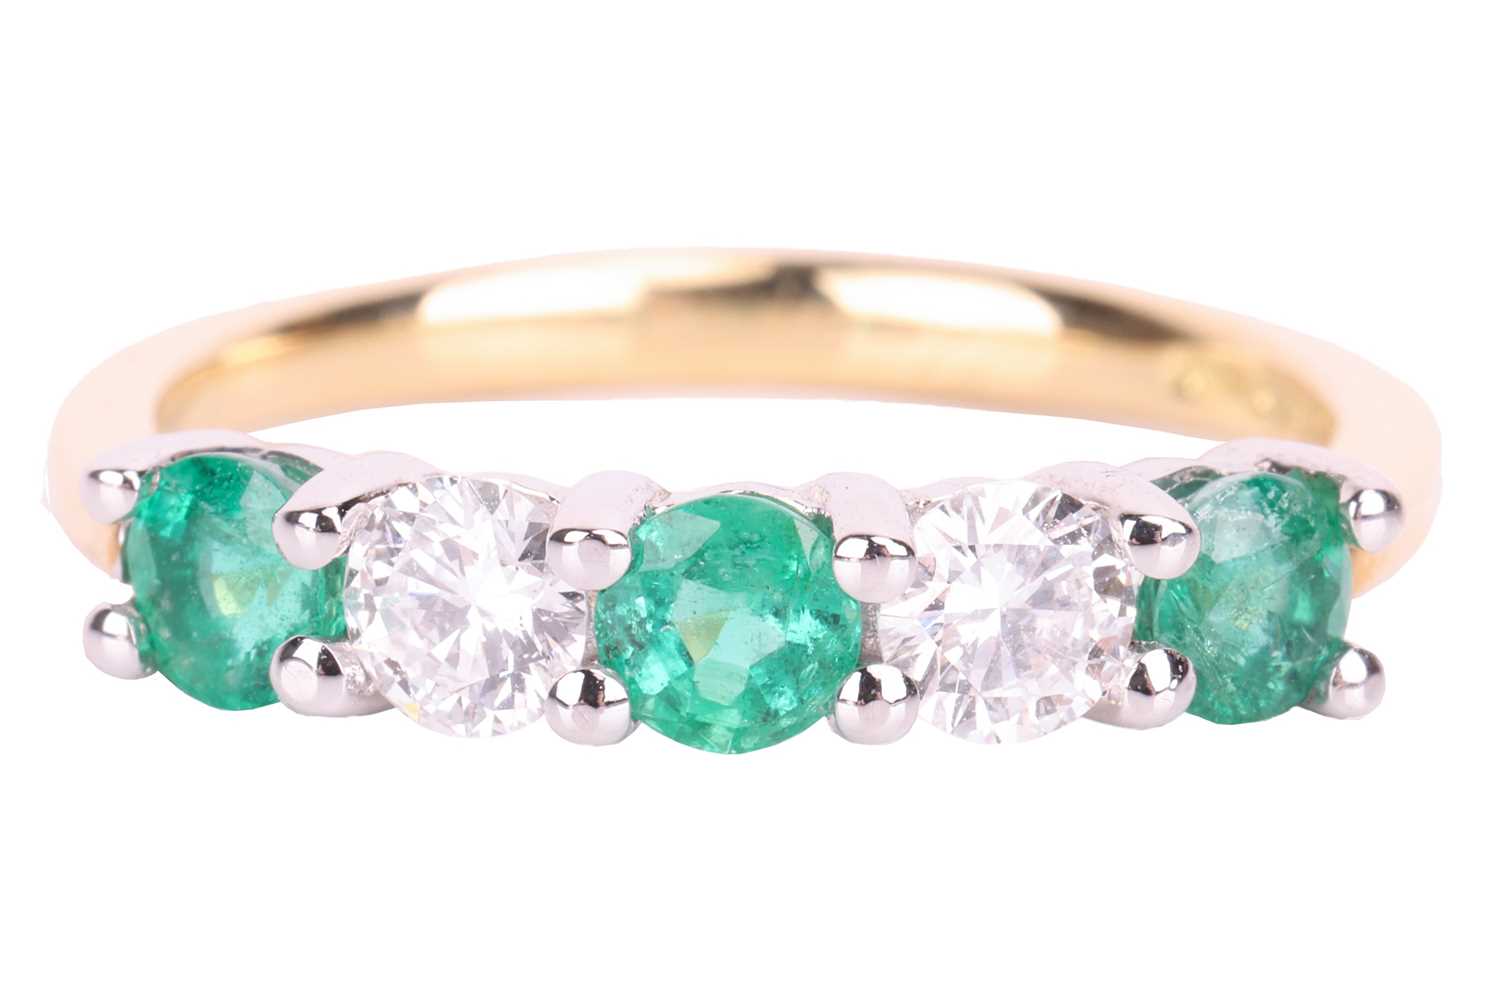 An emerald and diamond half-hoop ring in 18ct gold, alternating with circular-cut emeralds and brill